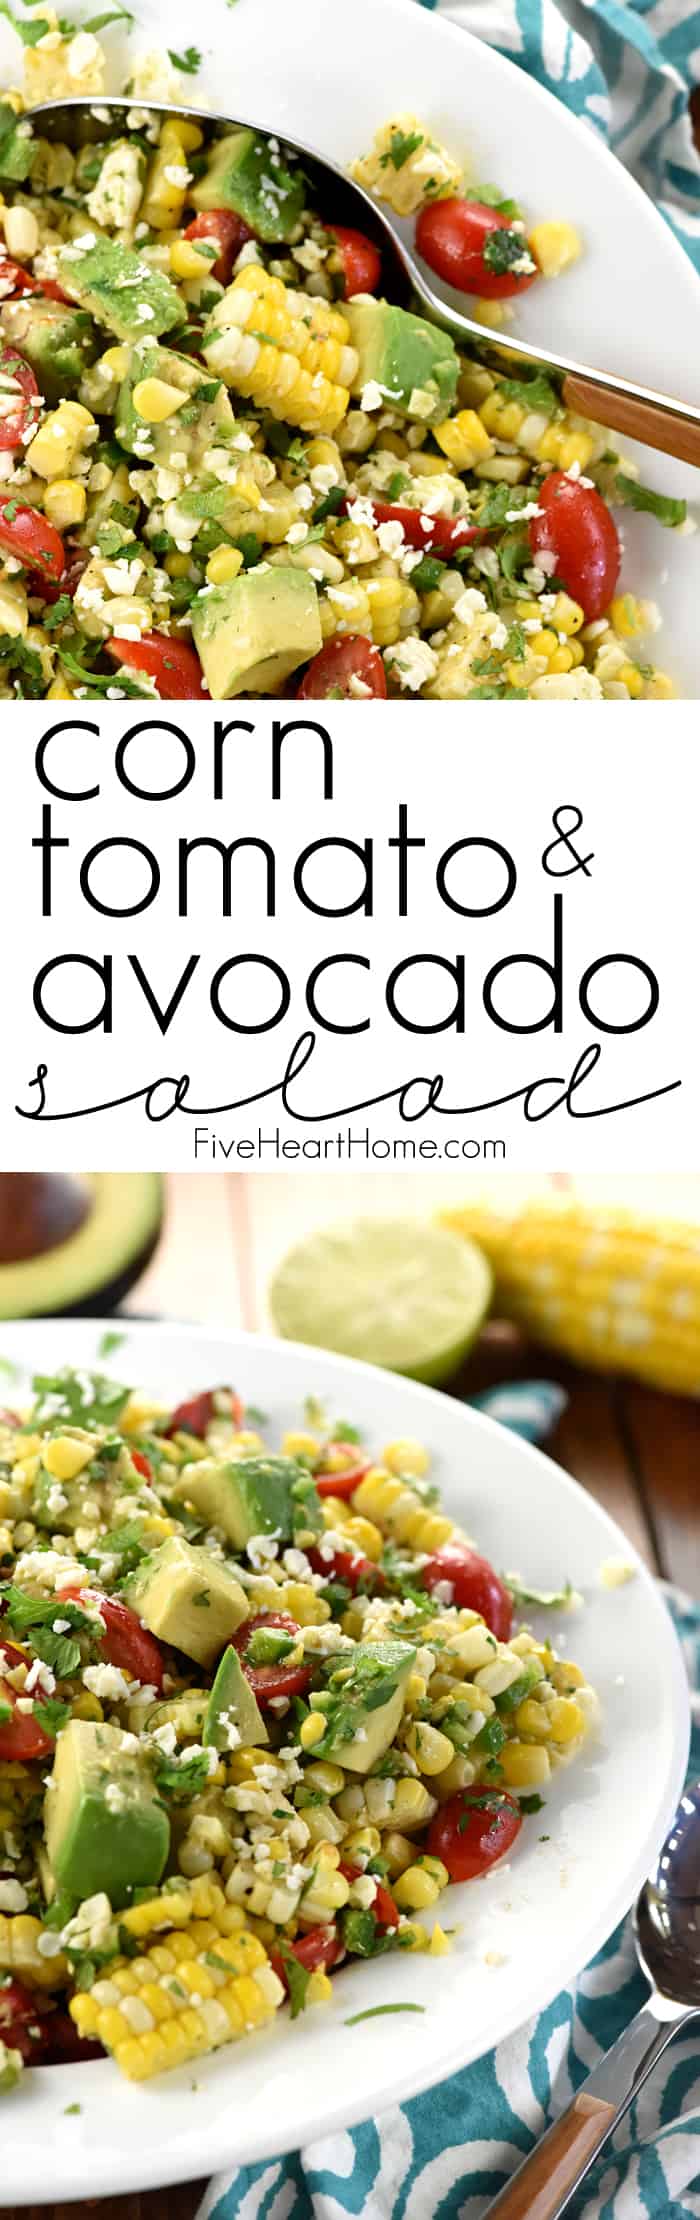 Corn Tomato Avocado Salad ~ an explosion of Tex-Mex flavors and summertime textures, with fresh roasted corn, juicy tomatoes, creamy avocado, minced jalapeño, crumbled cotija cheese, and fresh cilantro in a zippy lime vinaigrette! | FiveHeartHome.com via @fivehearthome